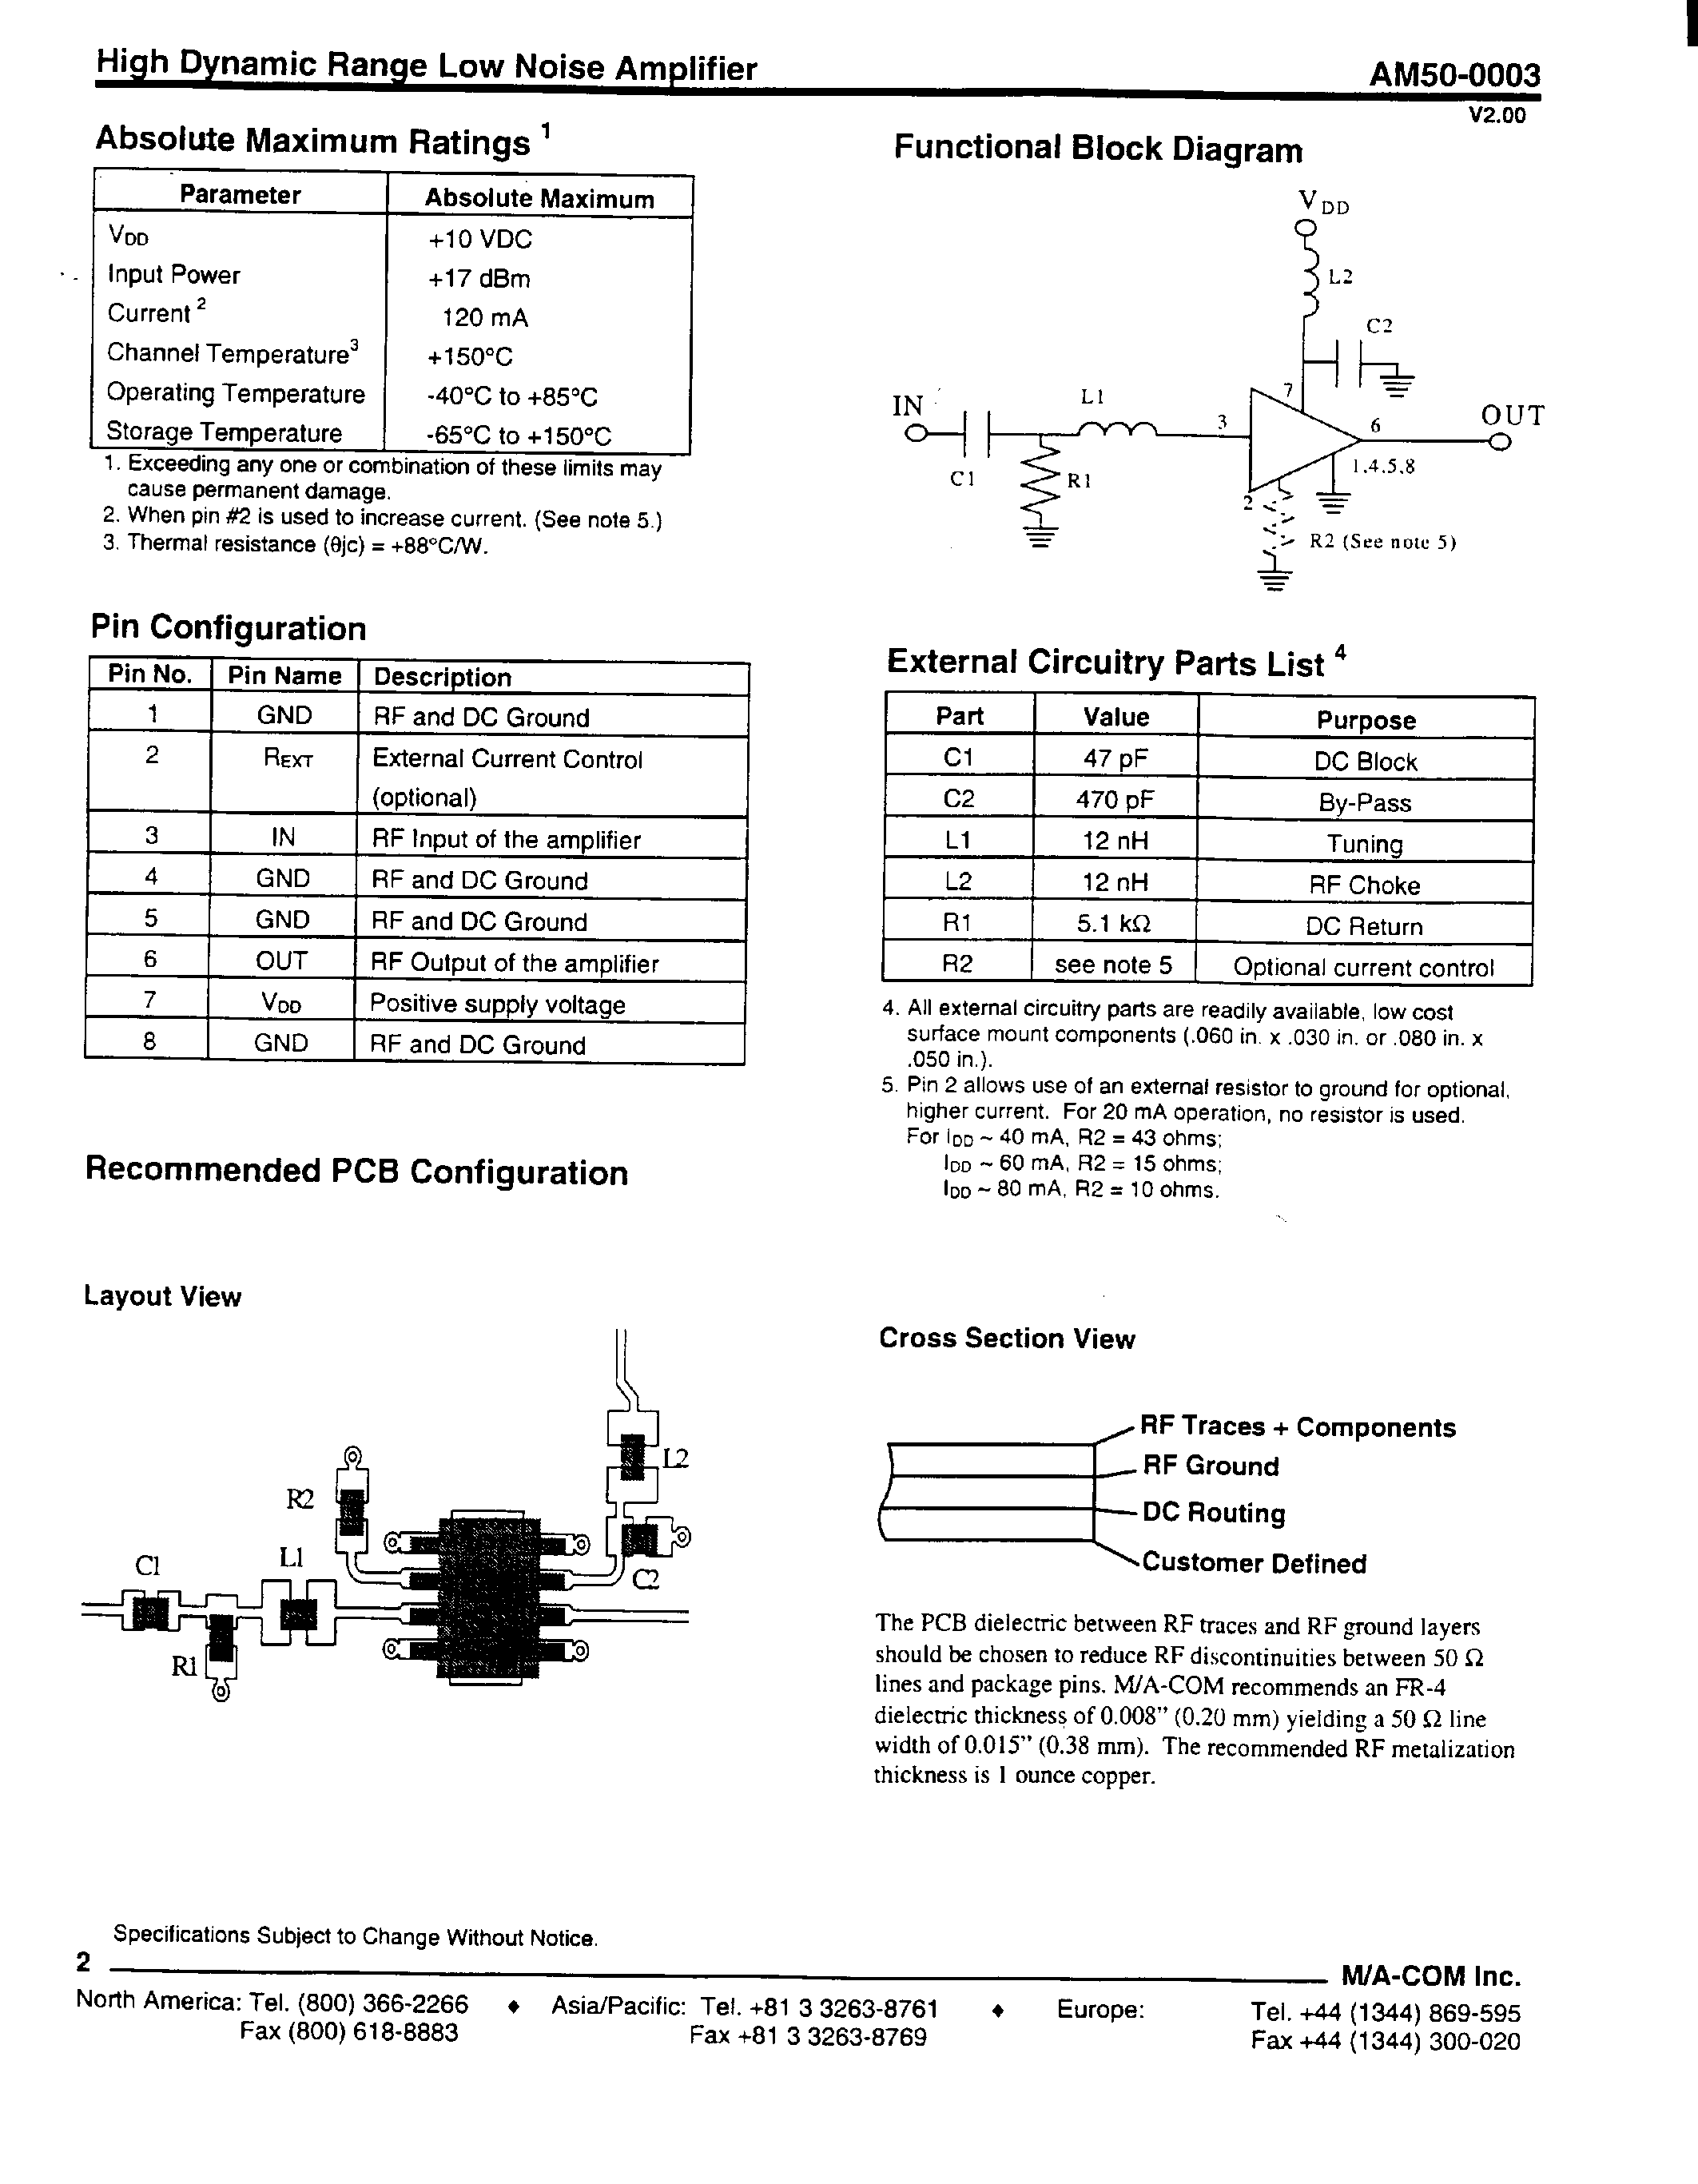 Datasheet AM50-0003TR - High Dynamic Range Low Noise Amplifier 800-1000 MHz page 2